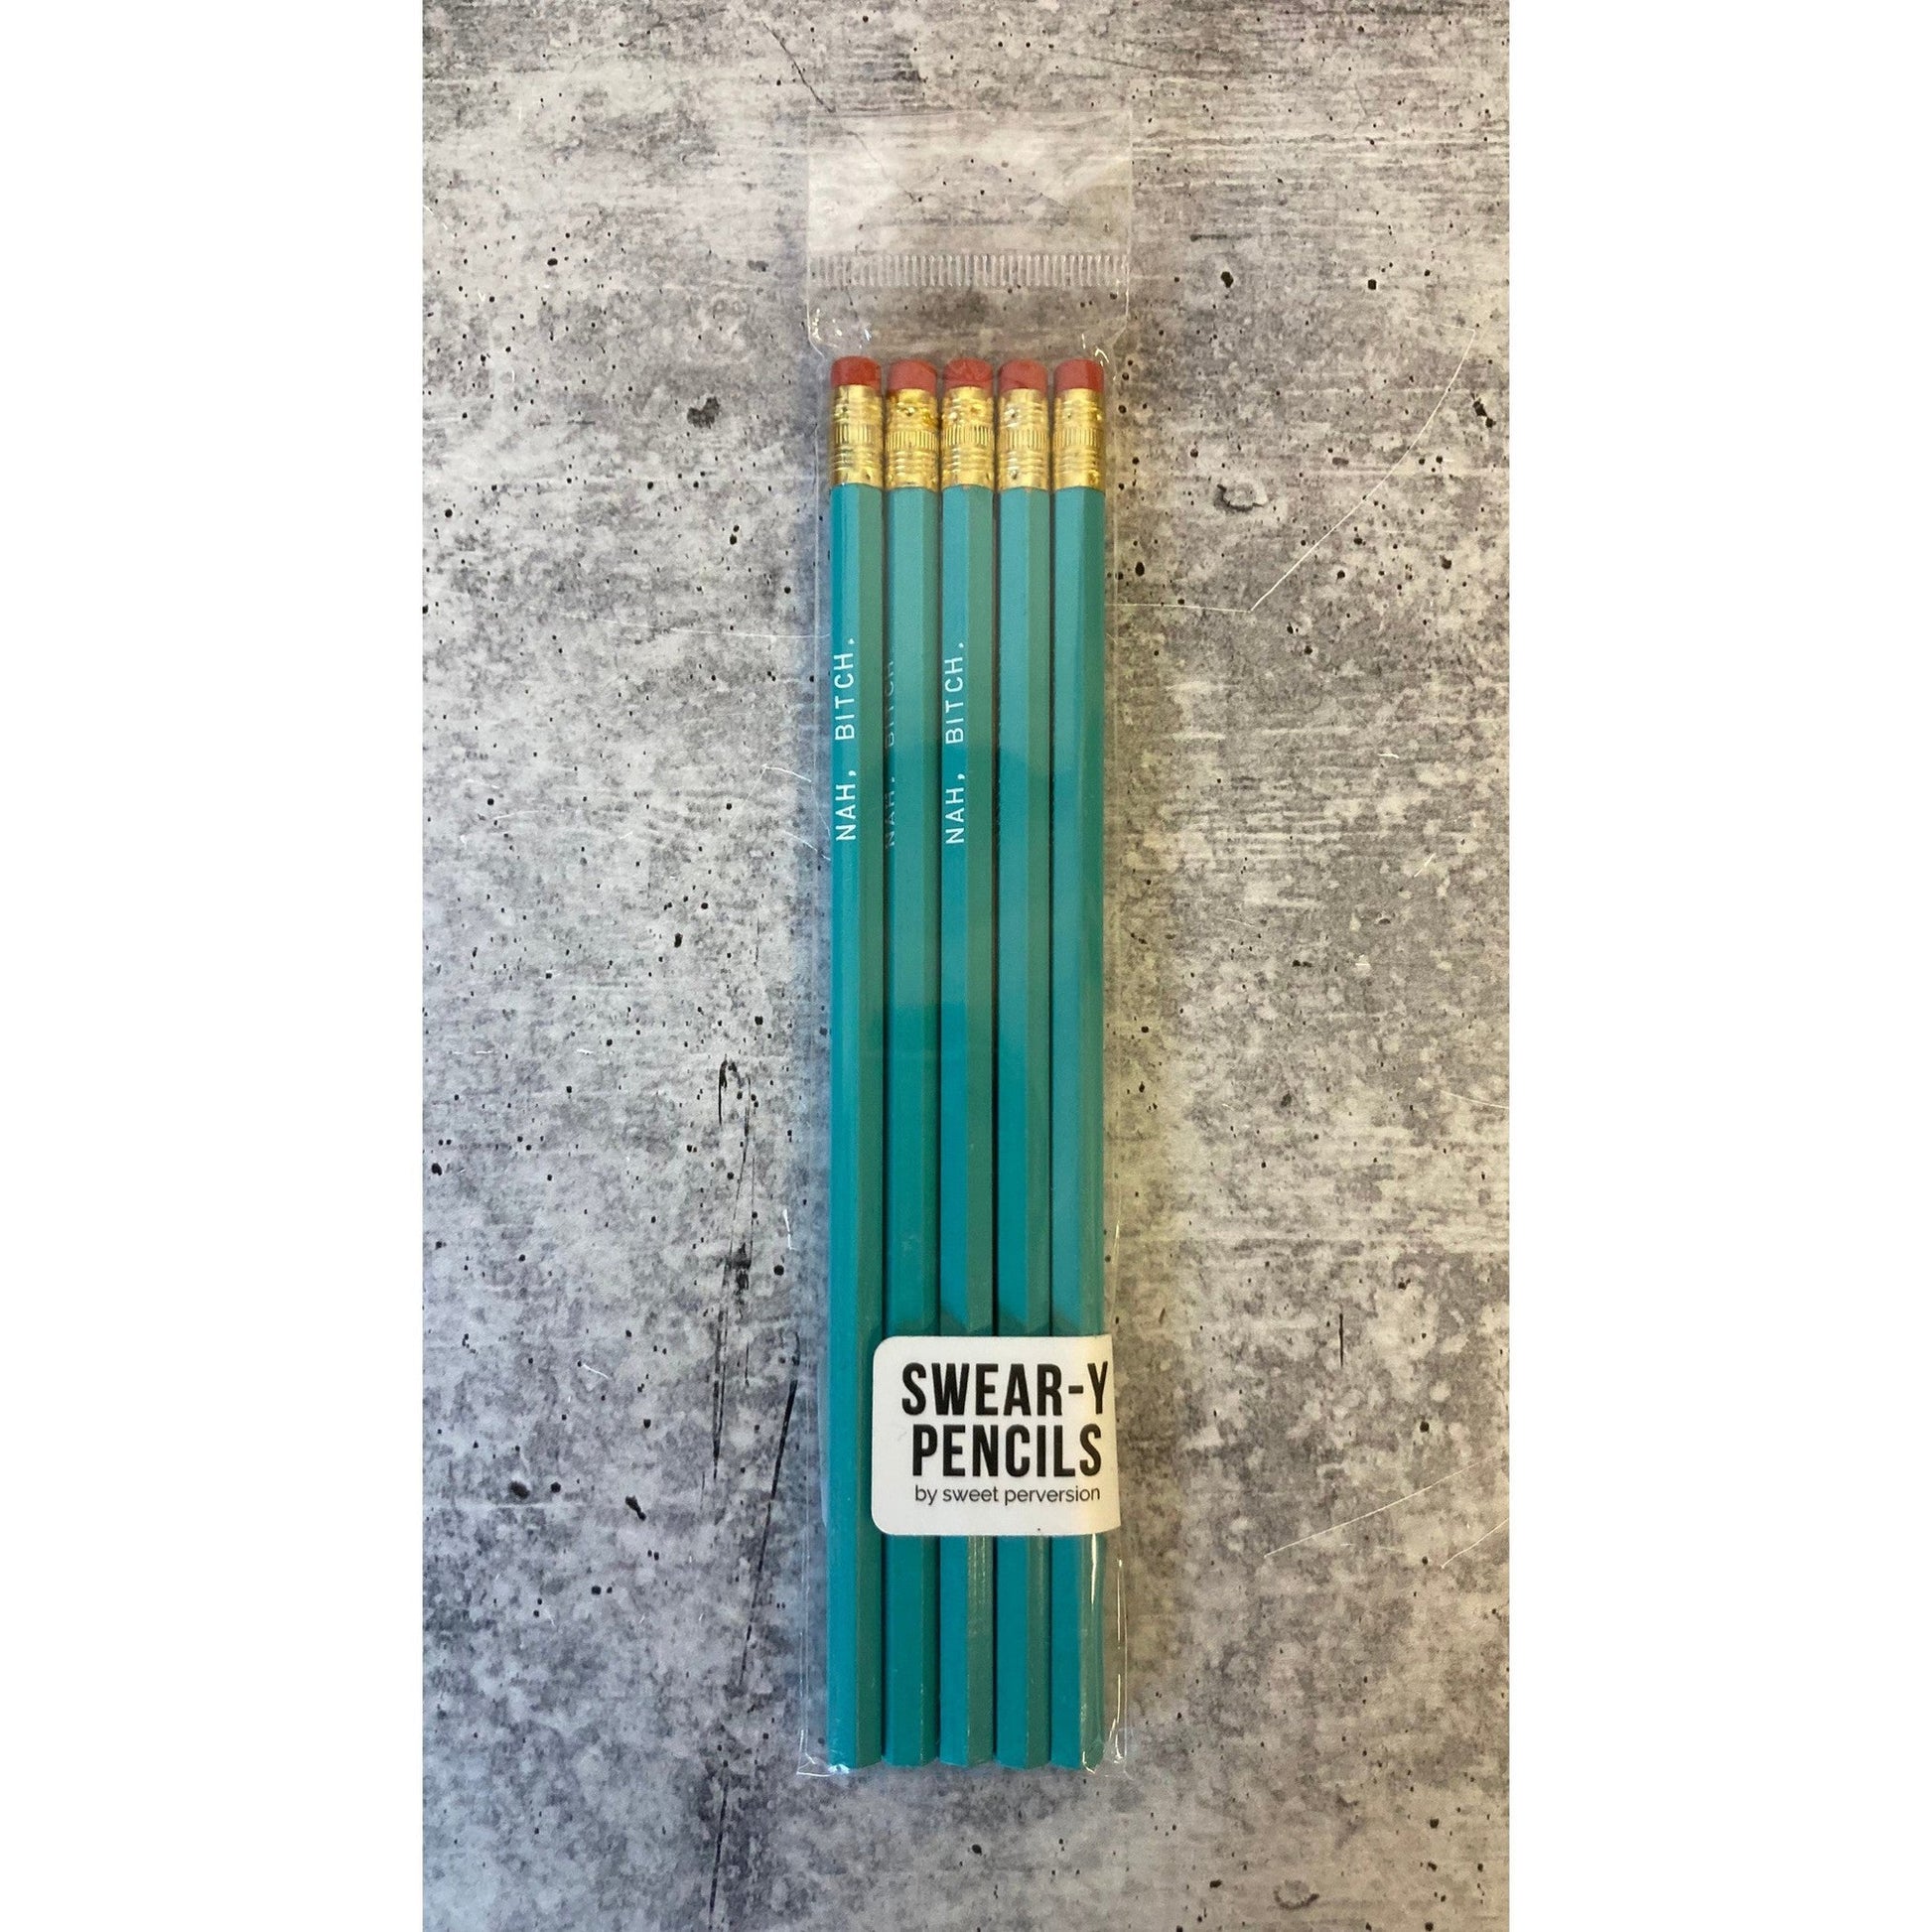 Nah, Bitch Wooden Pencil Set in Turquoise Blue | Set of 5 Funny Sweary Profanity Pencils